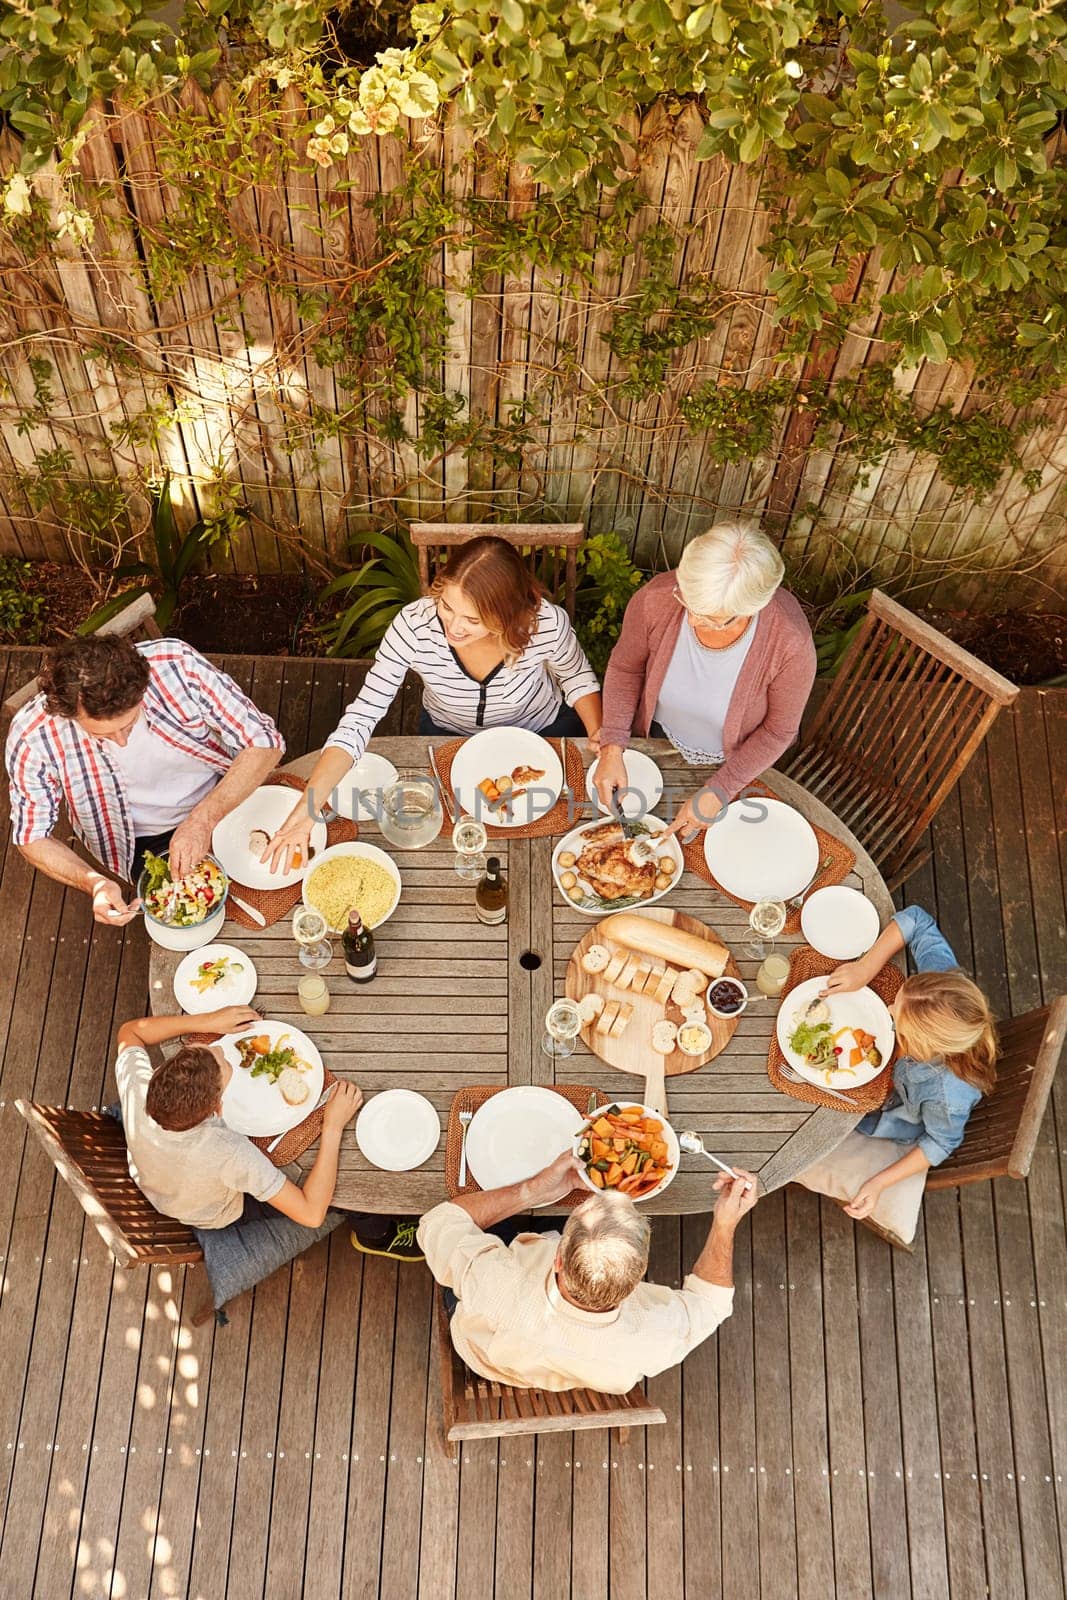 Reconnecting as a family over lunch. High angle shot of a family eating lunch outdoors